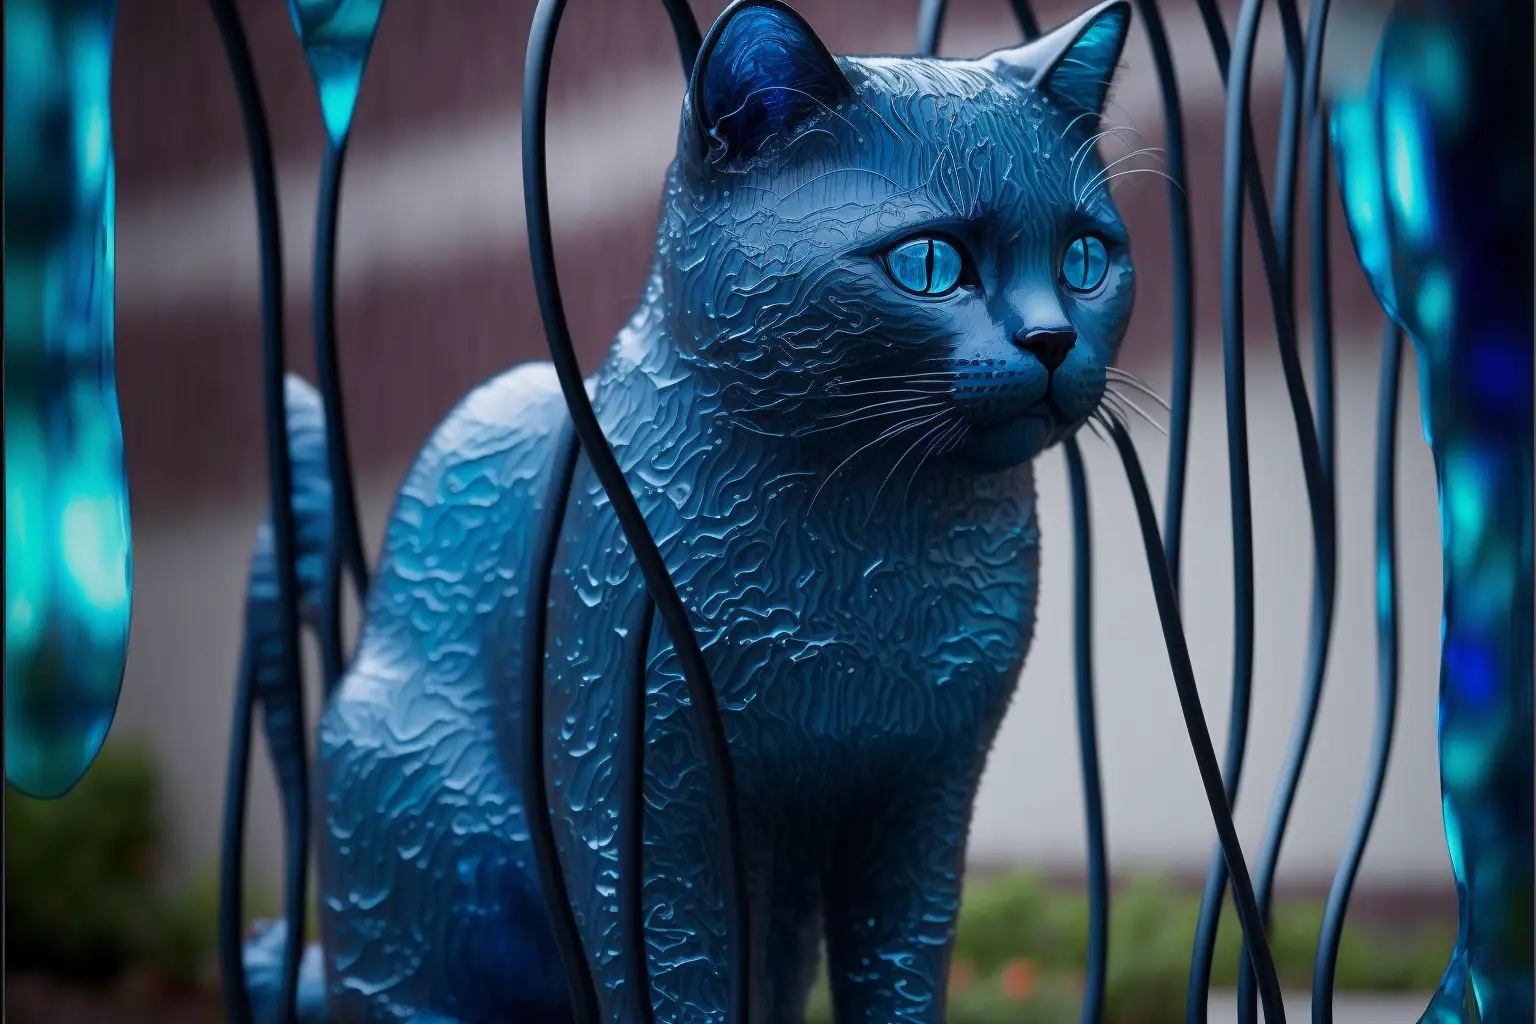 Blue Cat Made Of Glass On A Glass Fence Maoning At The Blue Moon